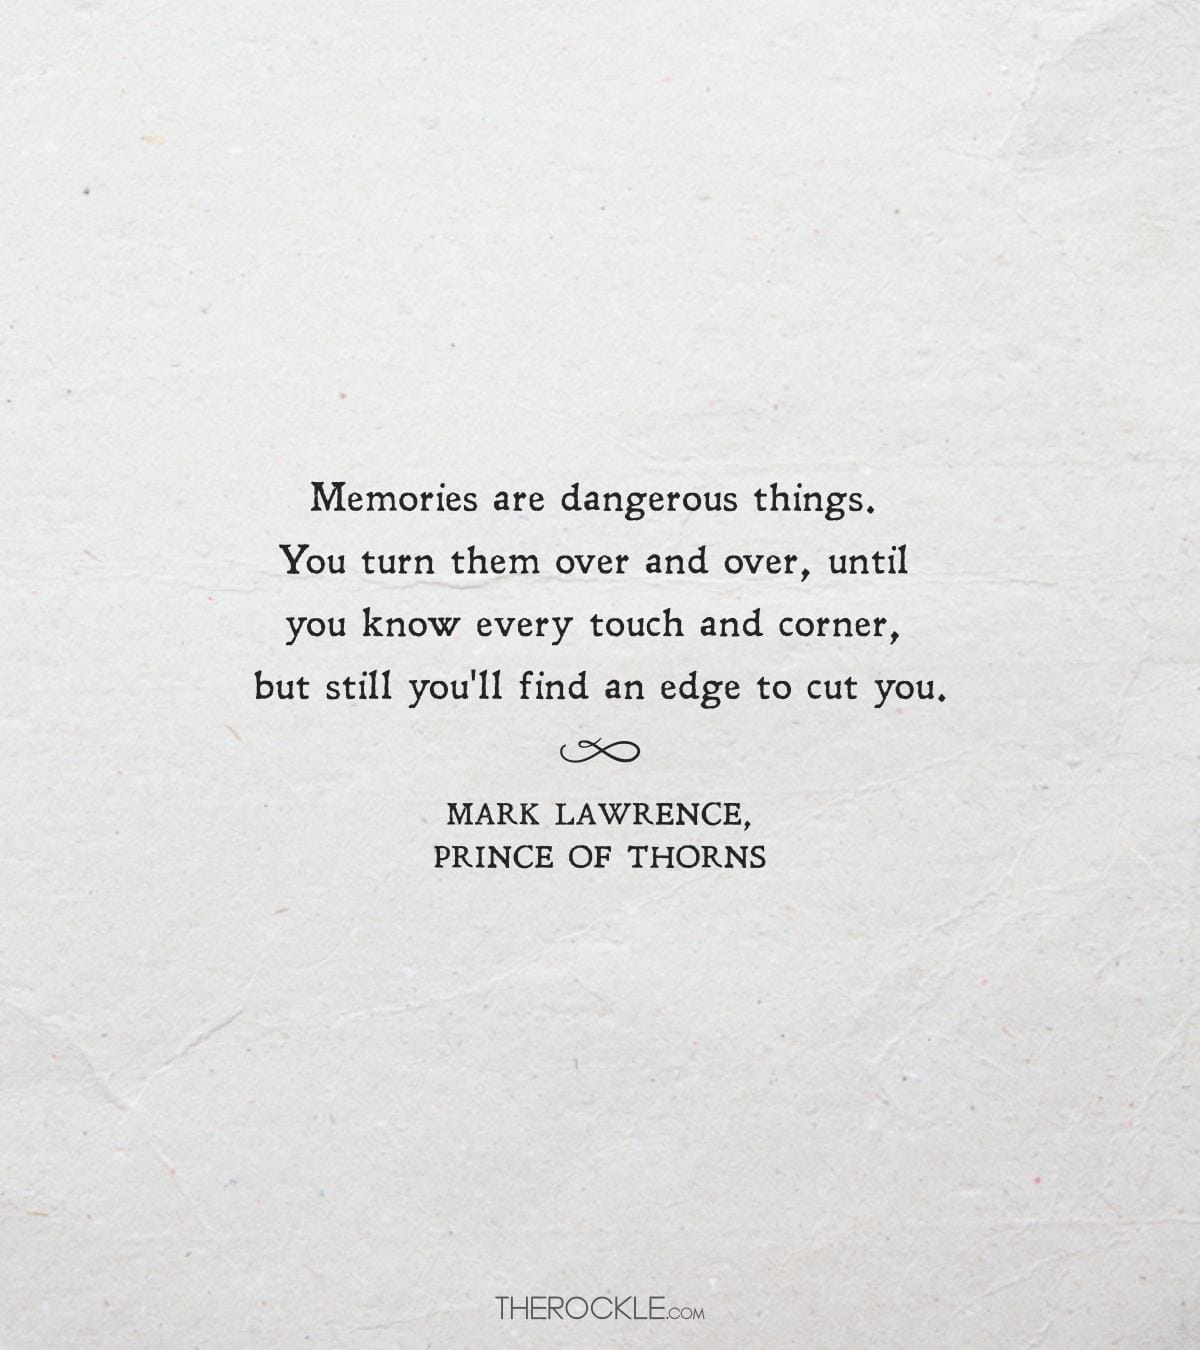 Mark Lawrence quote about memories